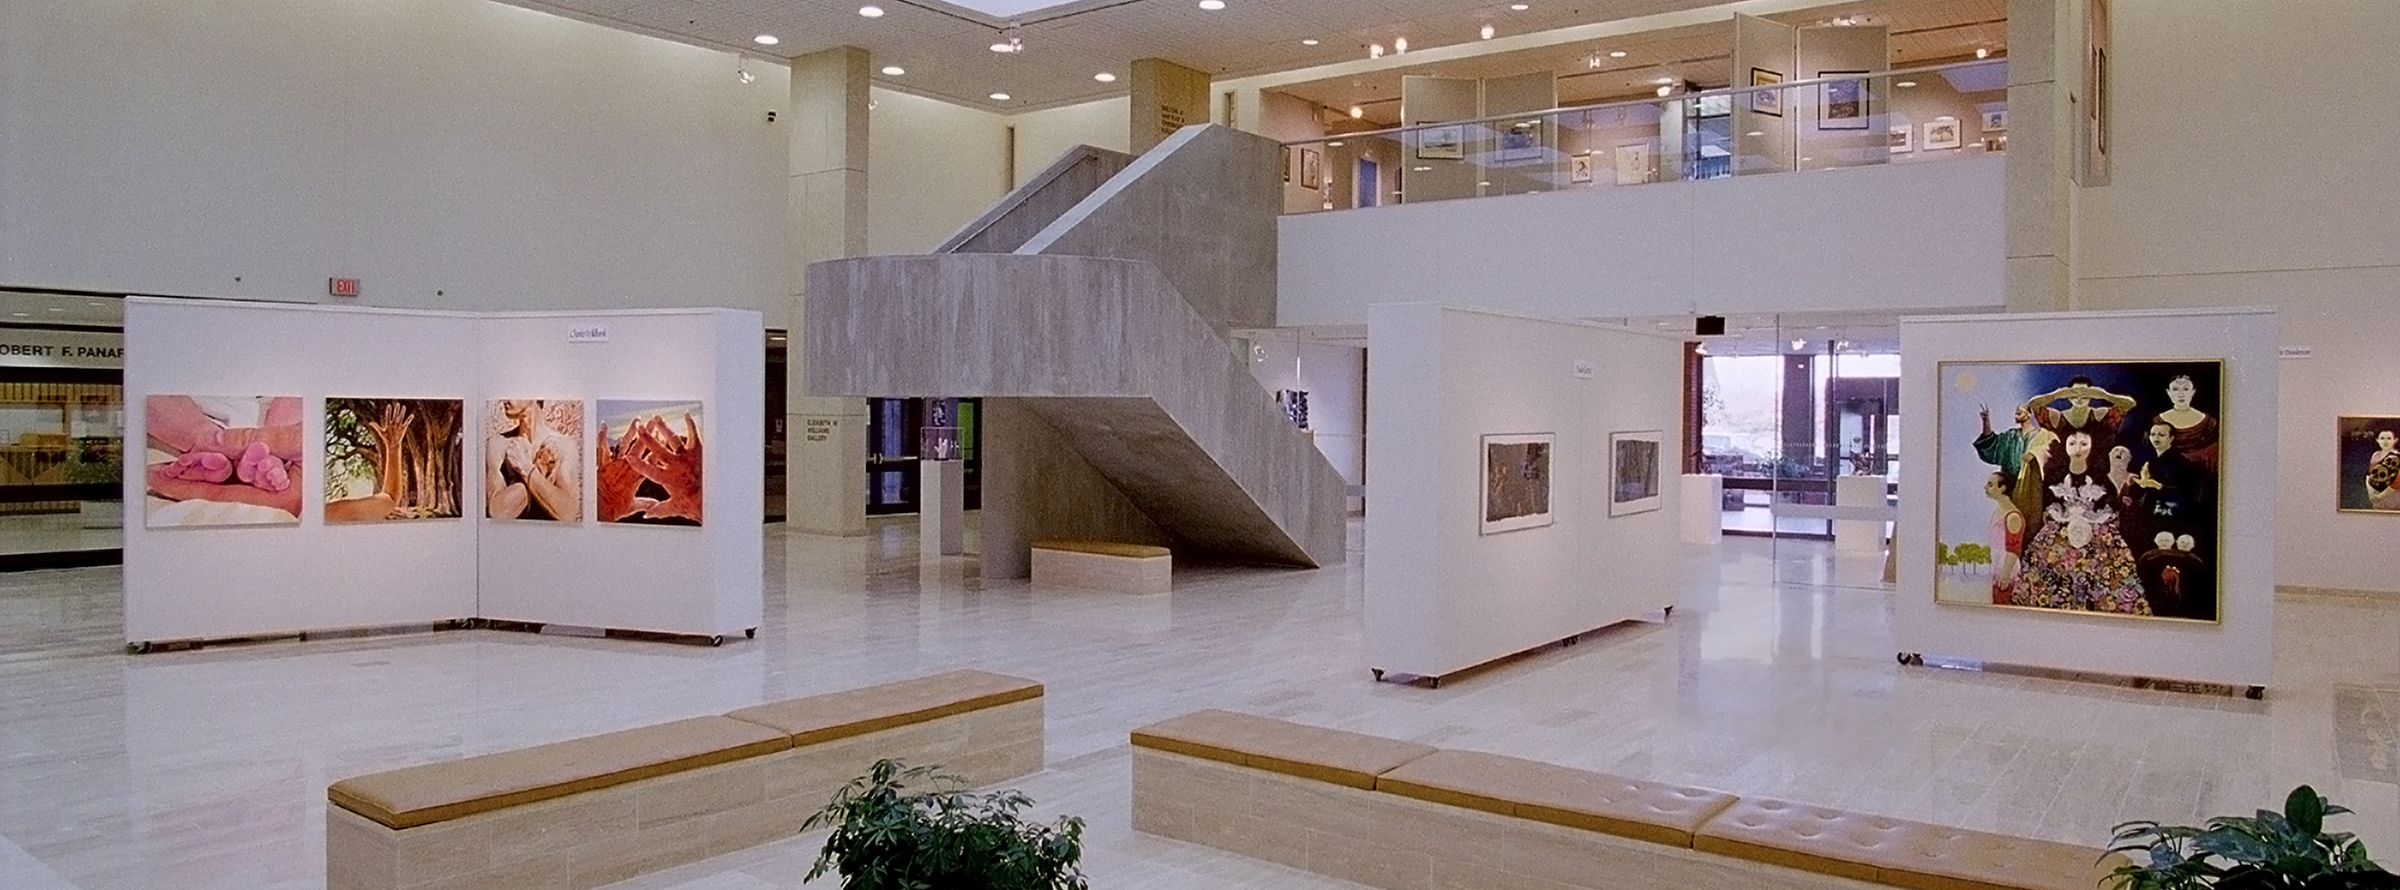 Photo of Dyer Arts space showing exhibits on moveable walls, large cement staircase, lighted ceiling